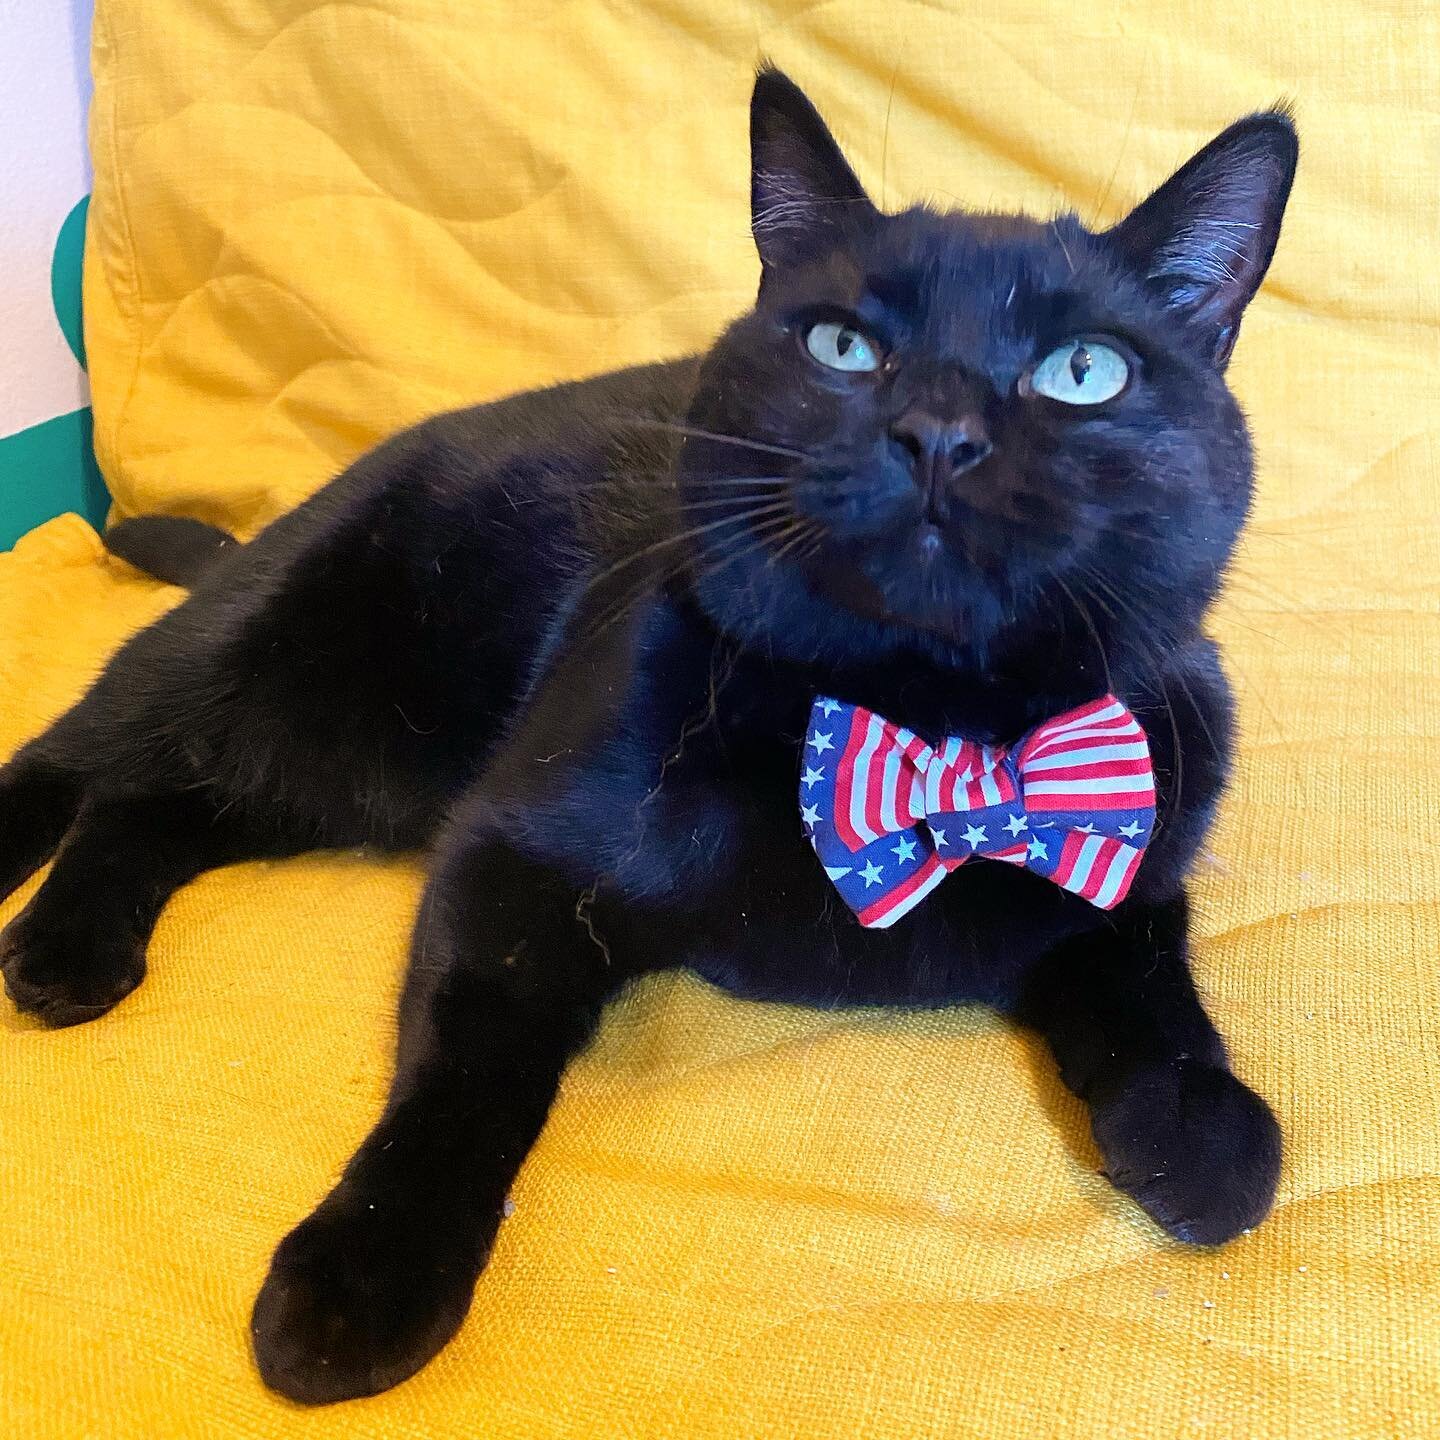 Professor says &ldquo;mom do I have to model this bow tie? I hate fireworks&rdquo; Don&rsquo;t forget that some pets are terrified of fireworks this 4th of July. Leave some music on and keep the windows closed to help them!